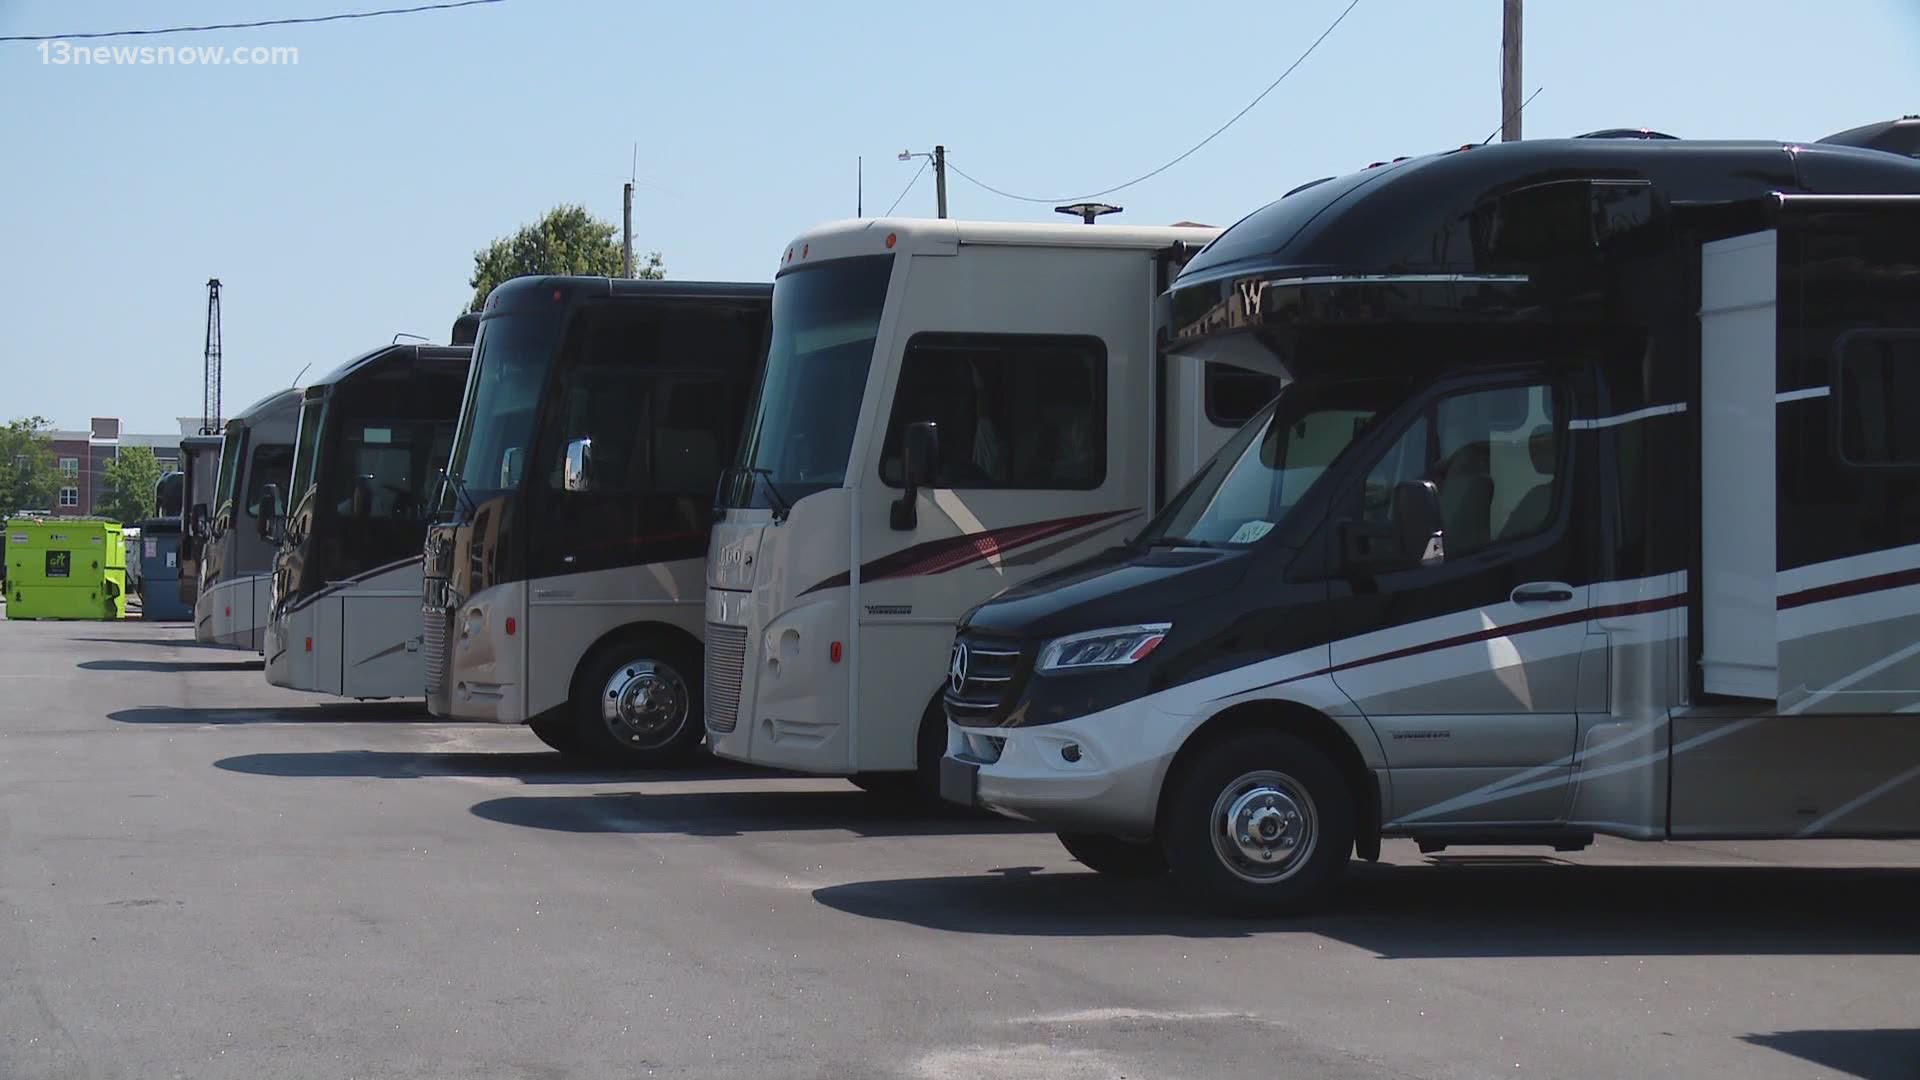 RV sales at Snyder's RV in Virginia Beach have tripled due to the coronavirus pandemic. AAA says it's telling of what we'll see during this summer travel season.